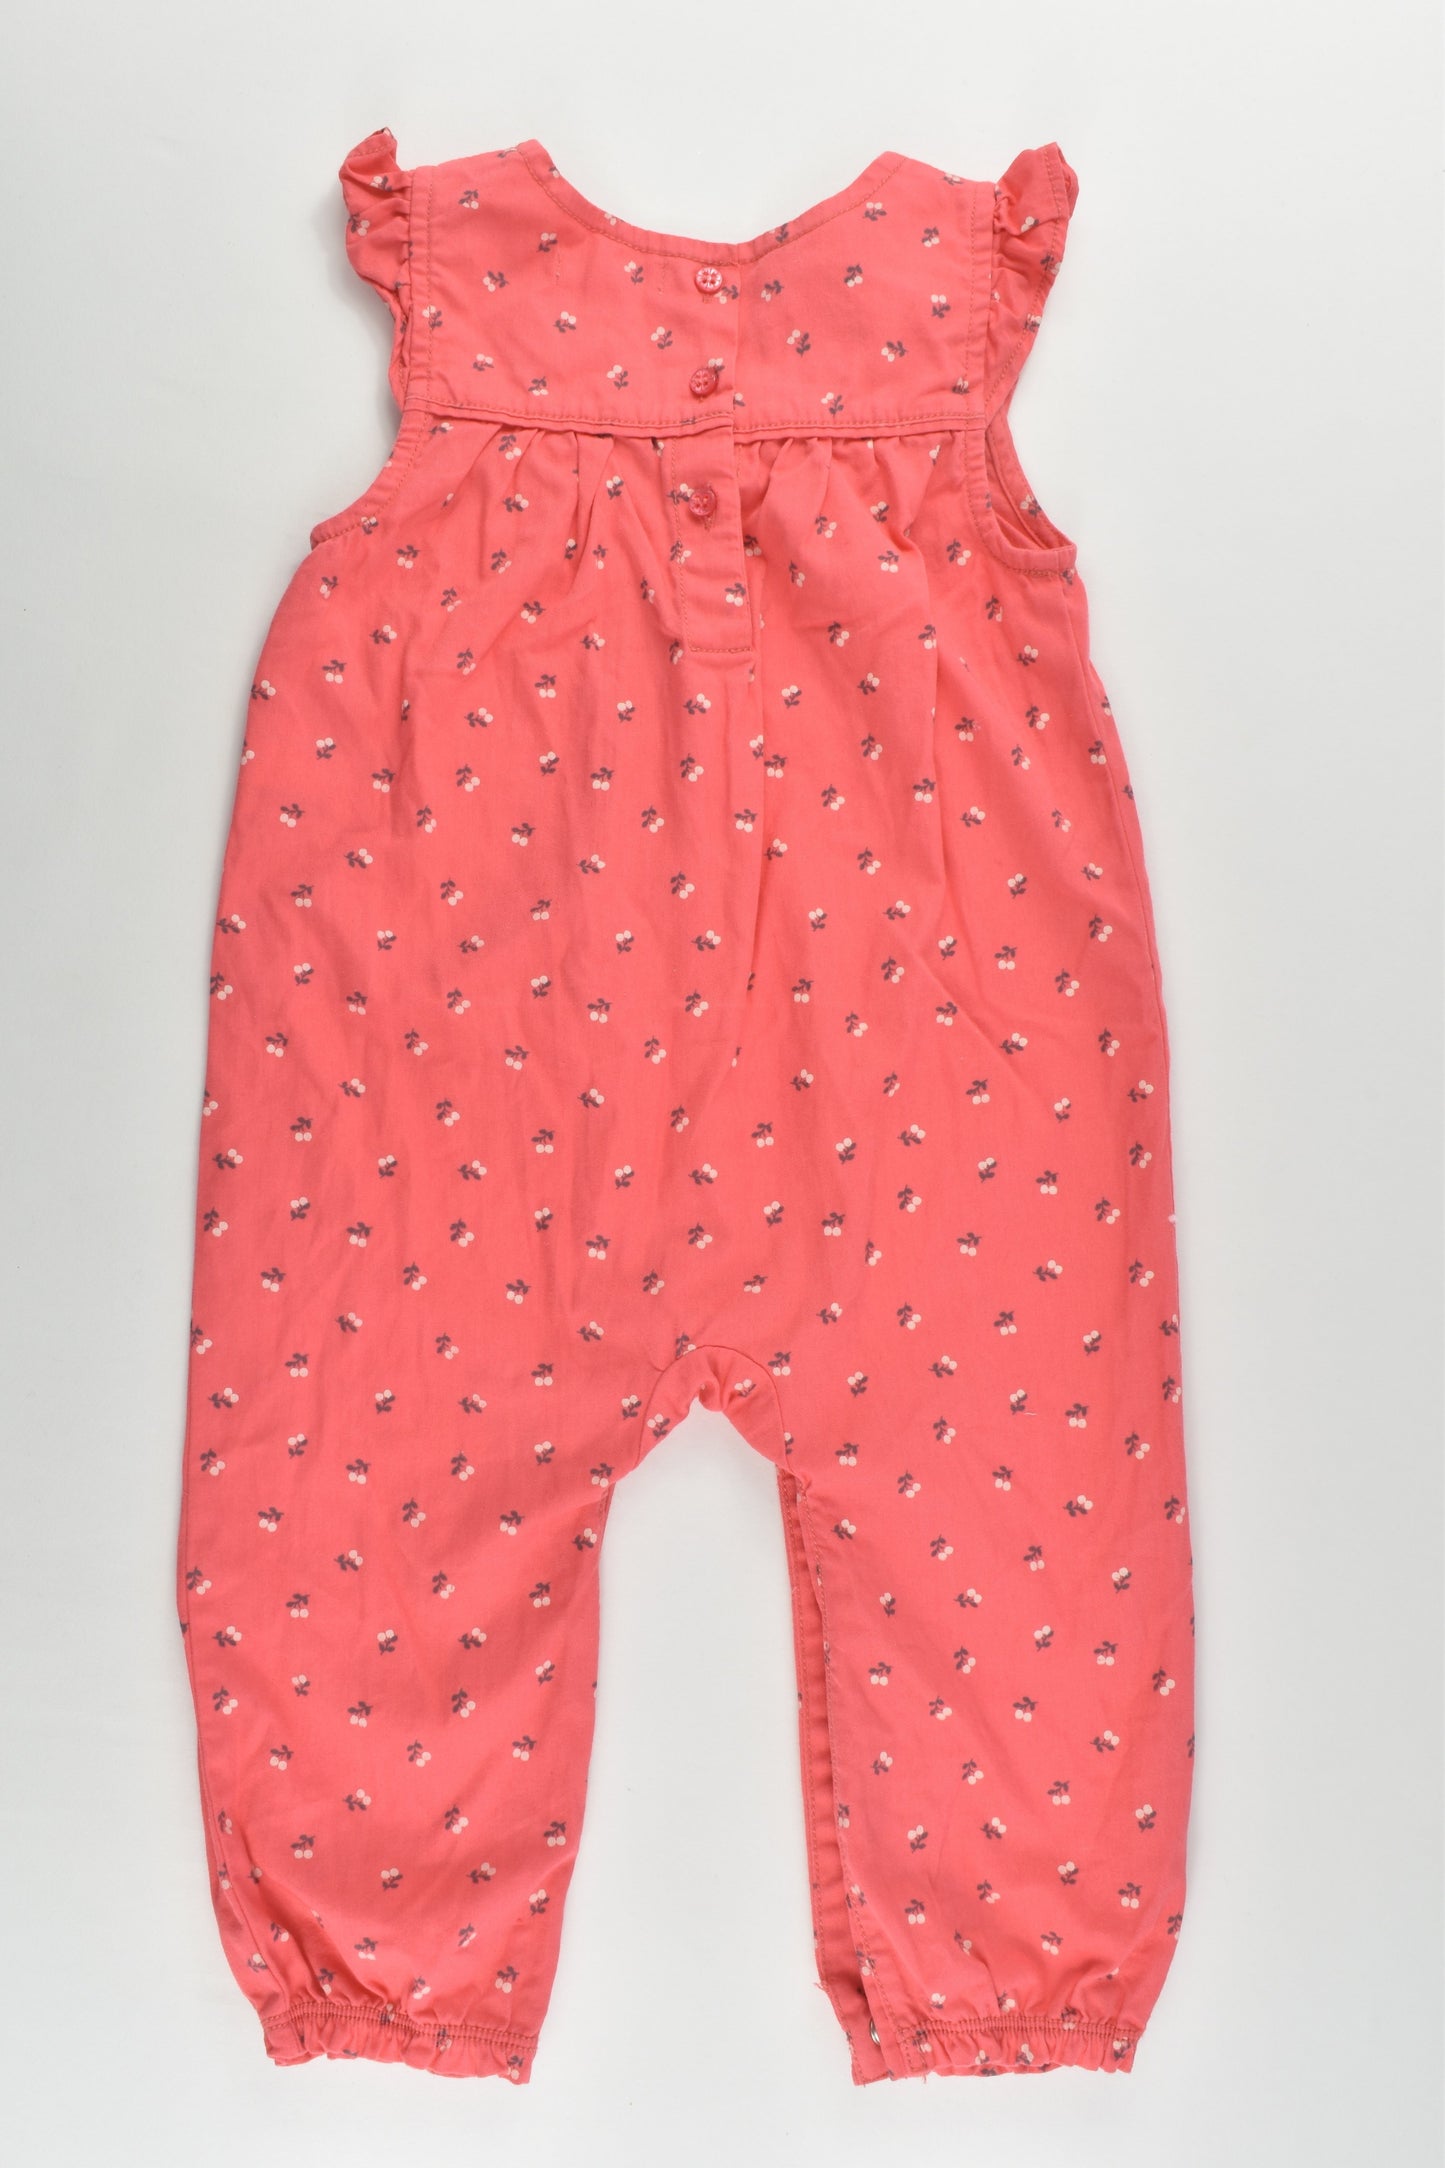 Purebaby Size 0 (6-12 months) Playsuit